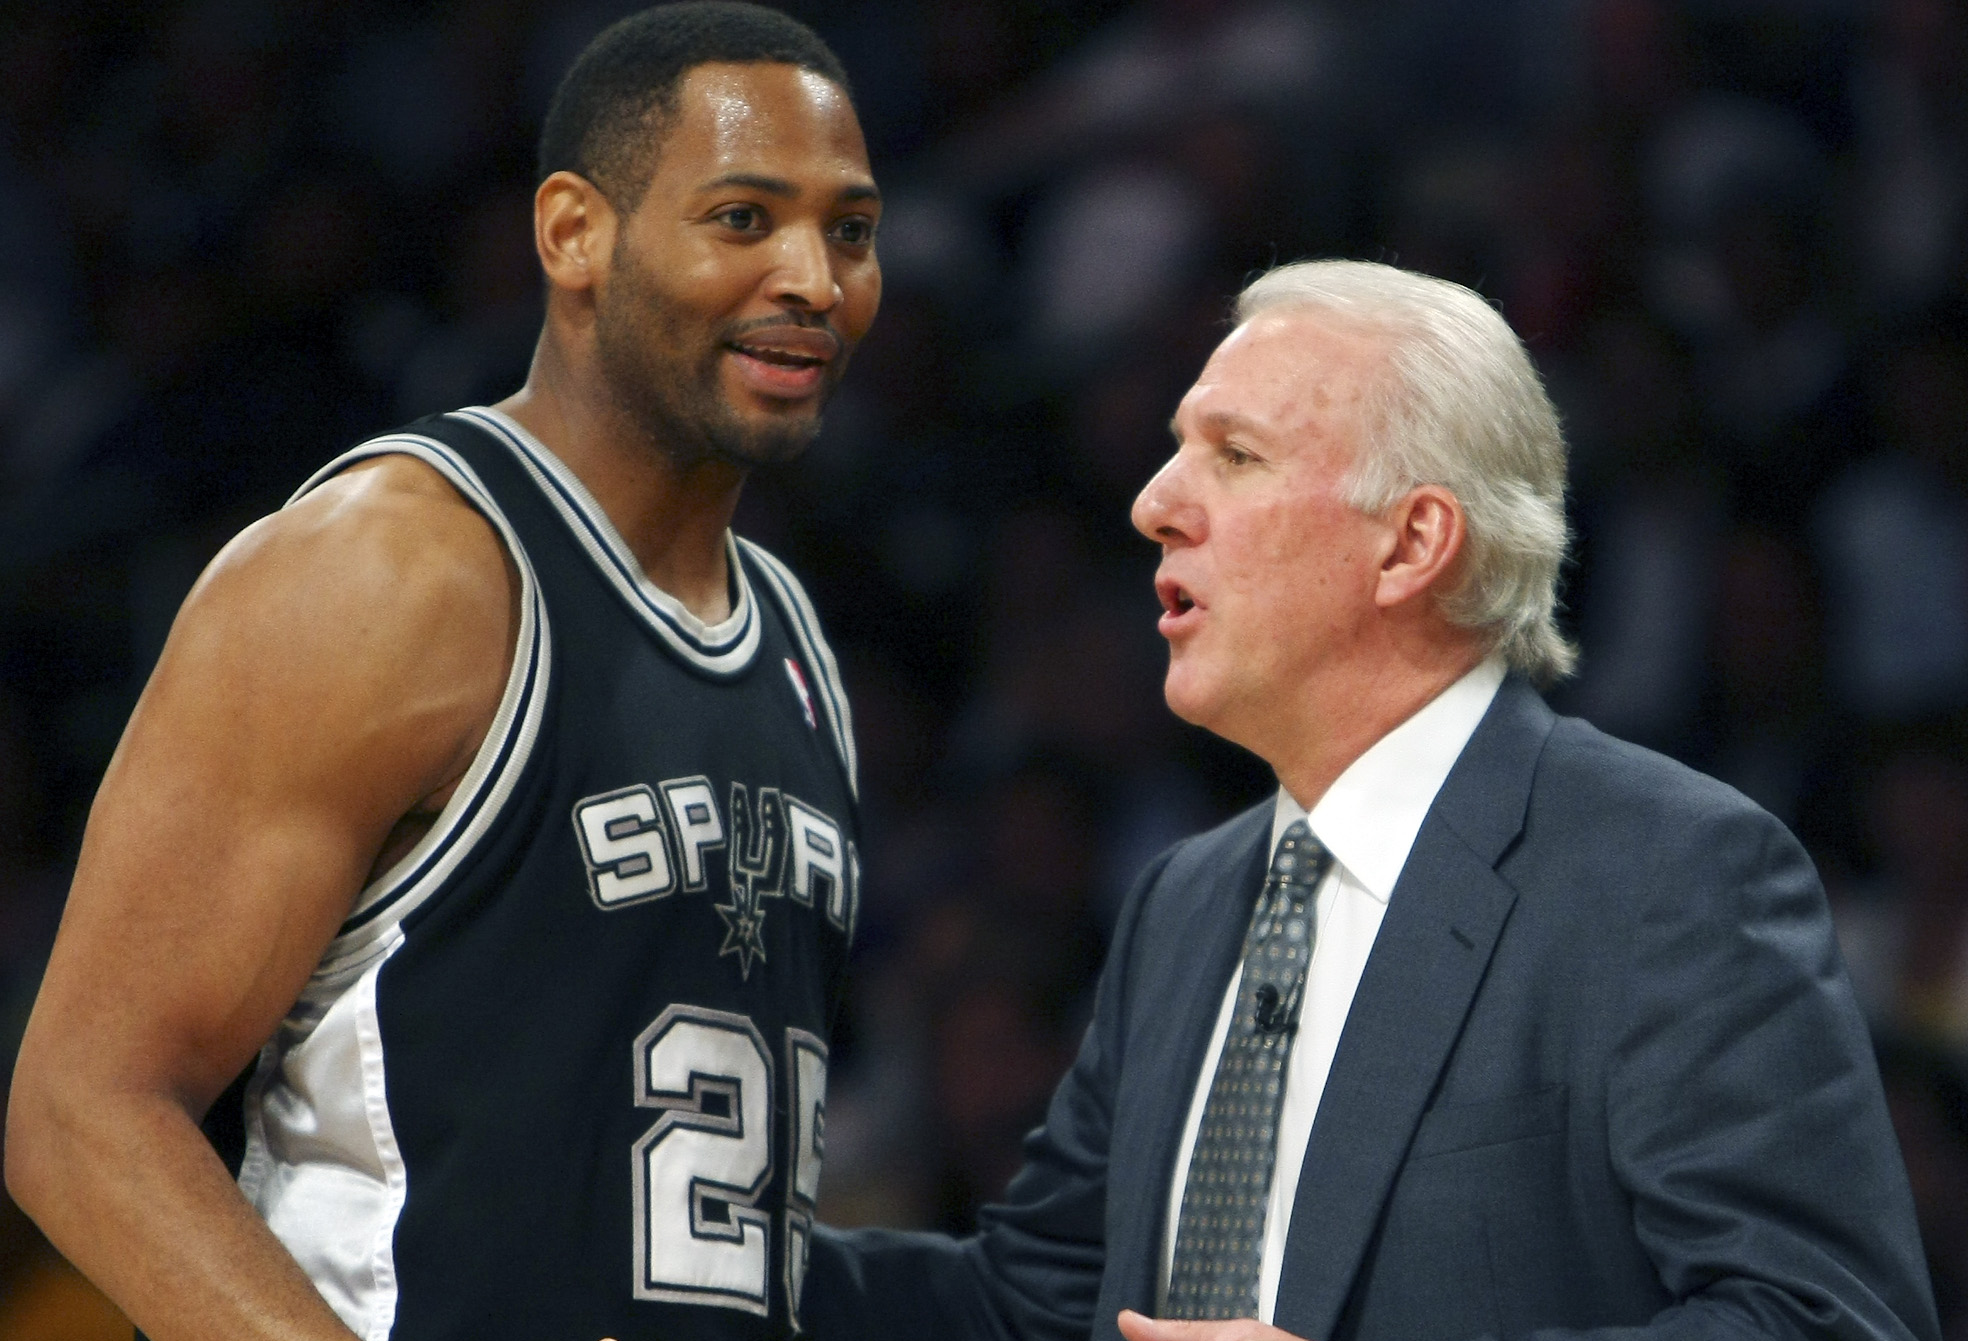 Robery Horry speaking with Gregg Popovich on the sidelines during an NBA game.